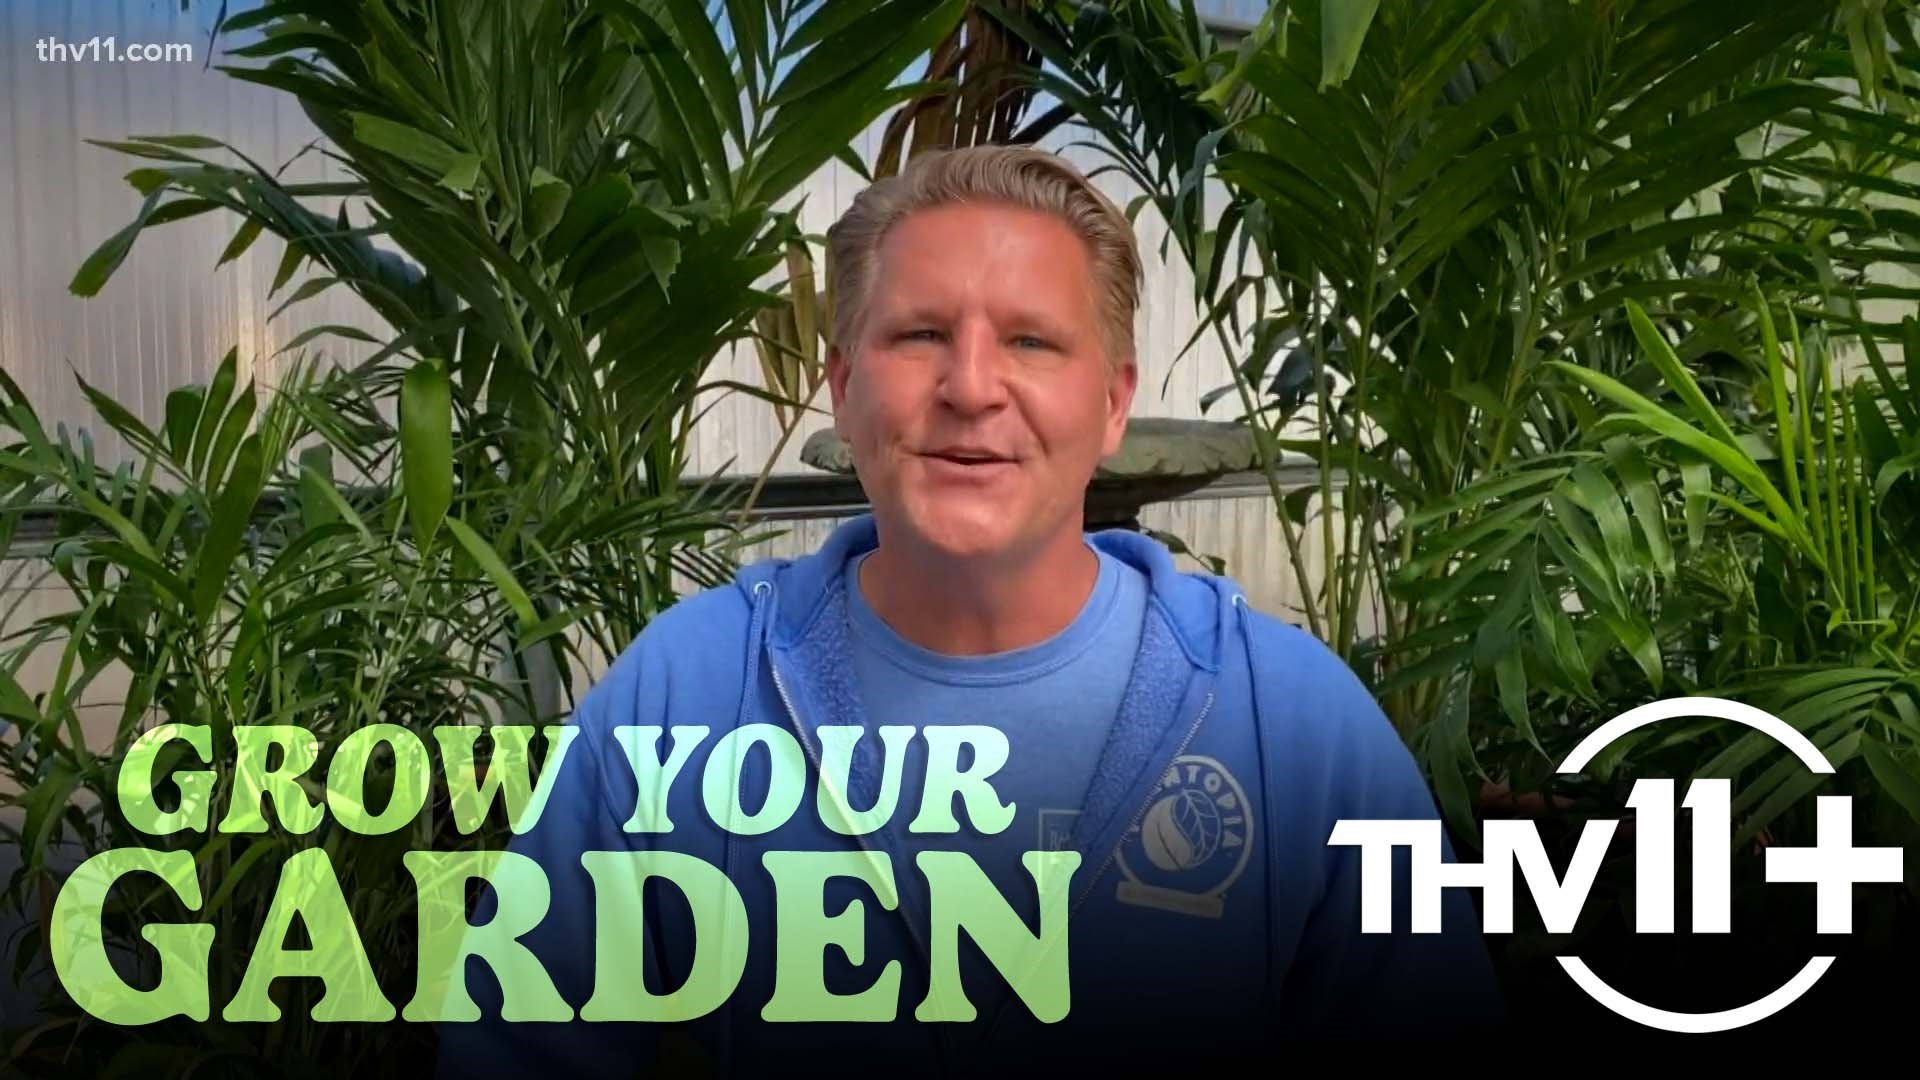 Chris H. Olsen gives the latest tips for growing your garden including advice on plants that will survive the summer heat and dealing with fire ants.